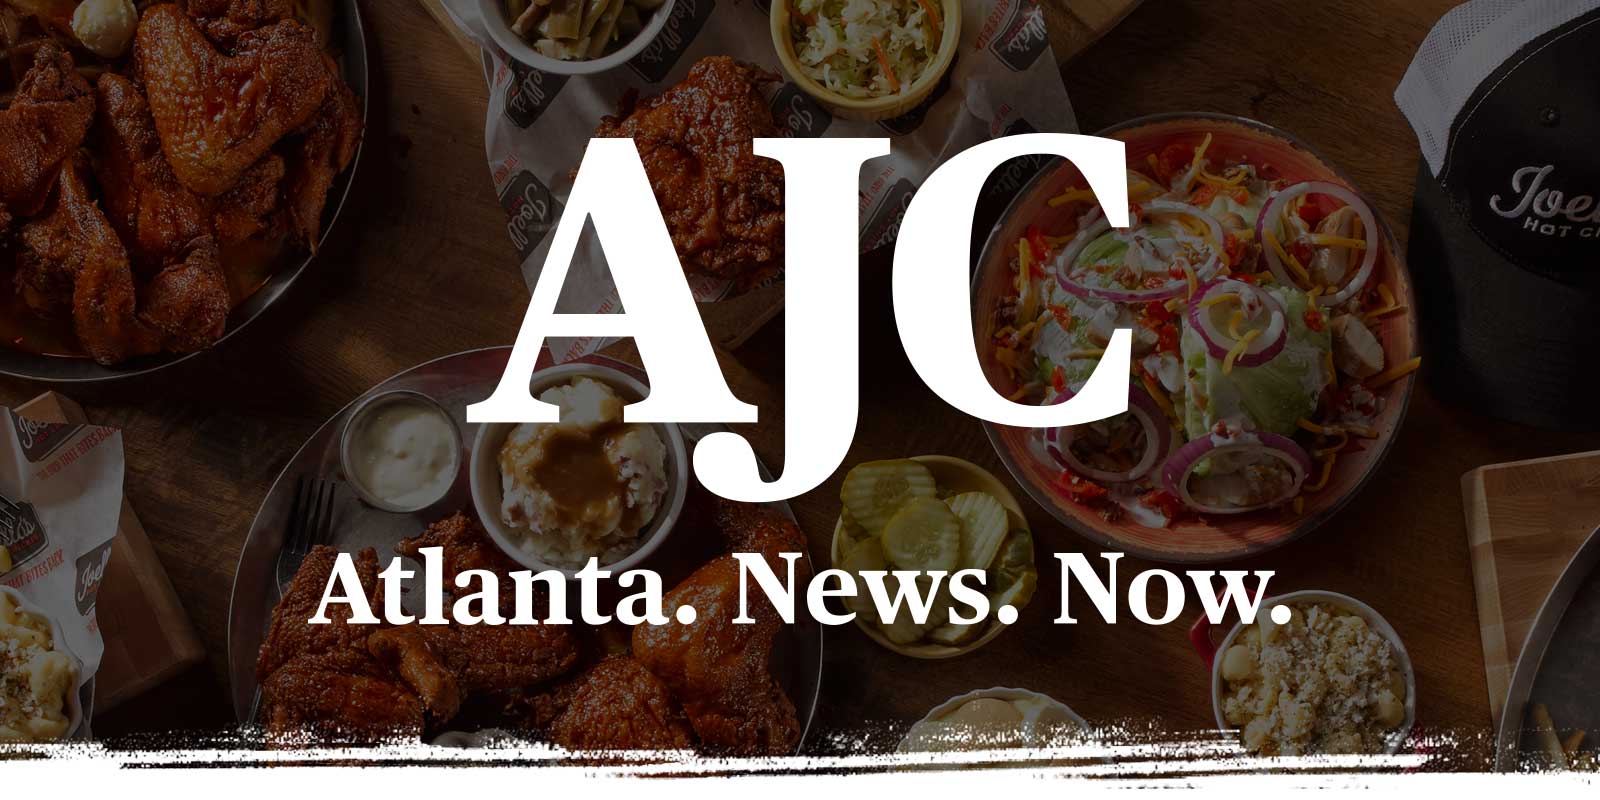 AJC logo on big table full of food background